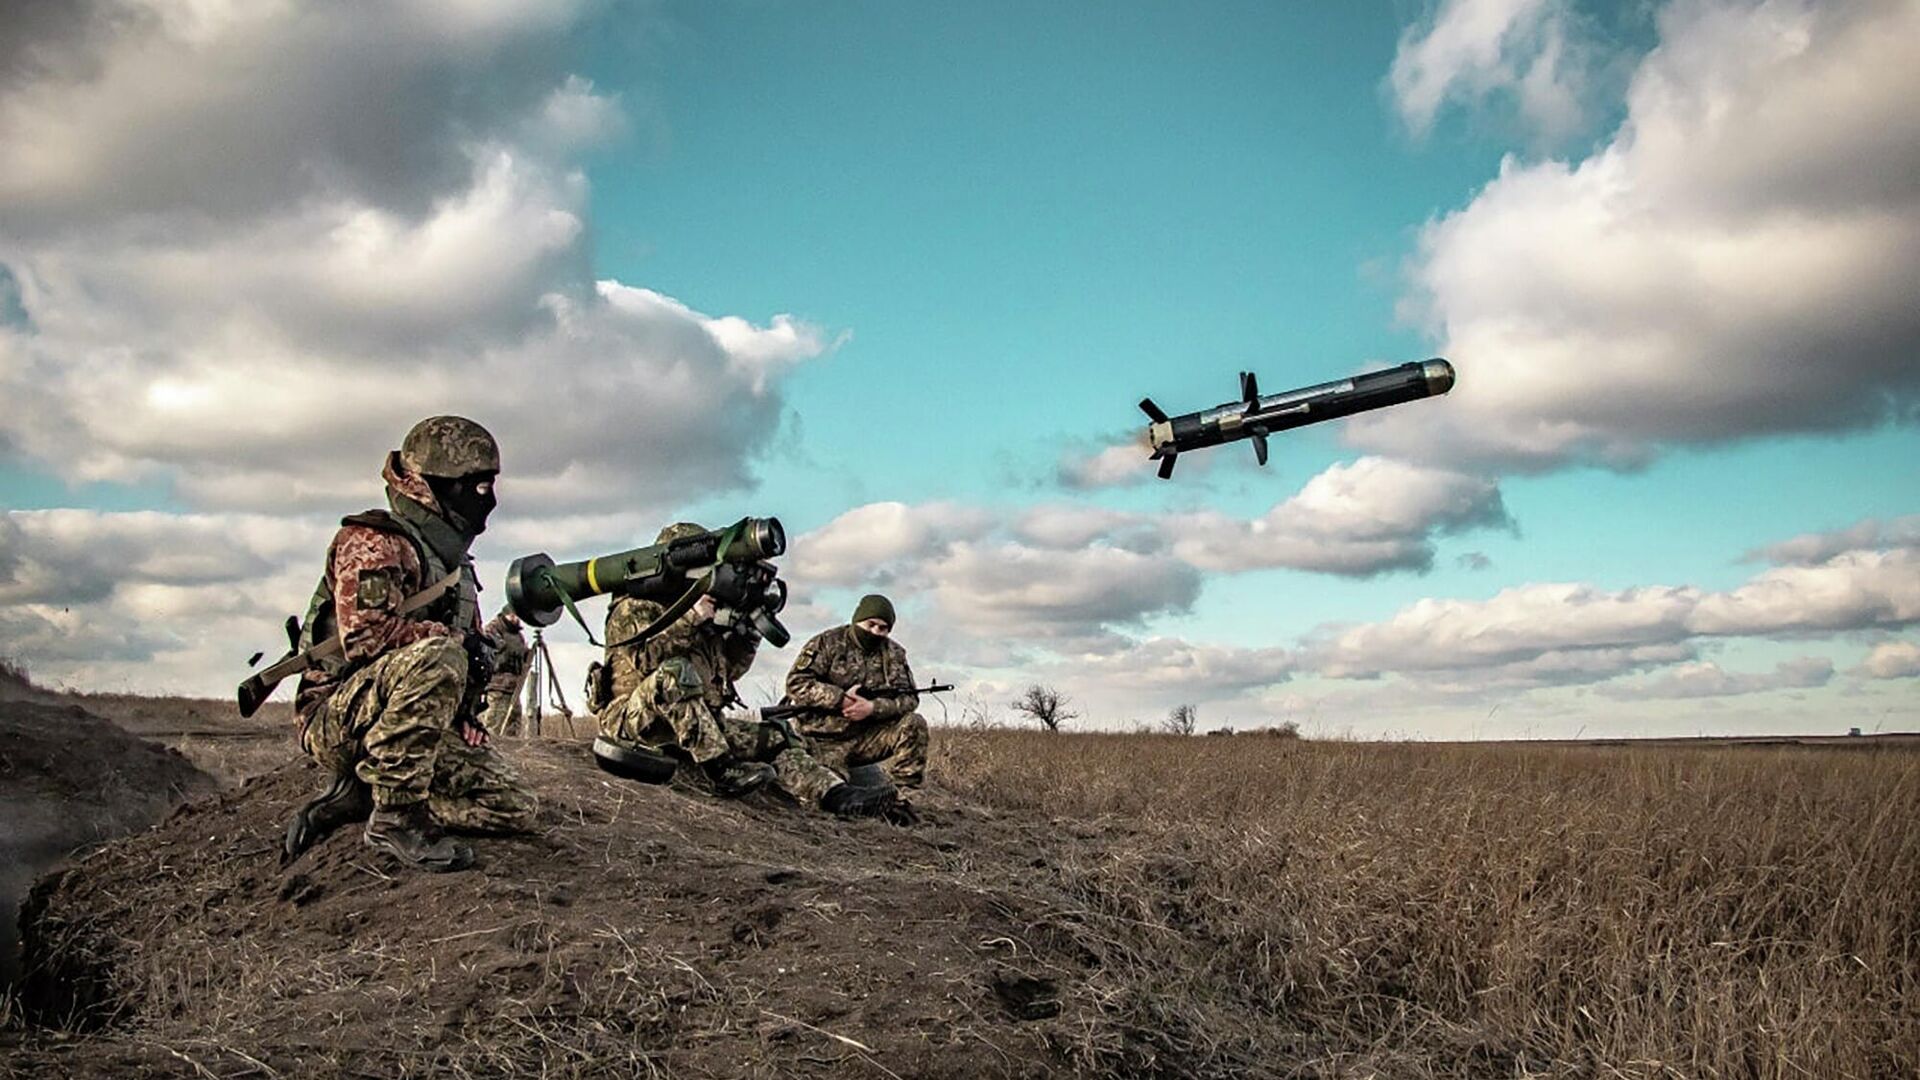 In this image released by the Ukrainian Defence Ministry Press Service, Ukrainian soldiers use a launcher with US Javelin missiles during military exercises in the Donetsk Region, Thursday, Dec. 23, 2021. - Sputnik International, 1920, 22.02.2022